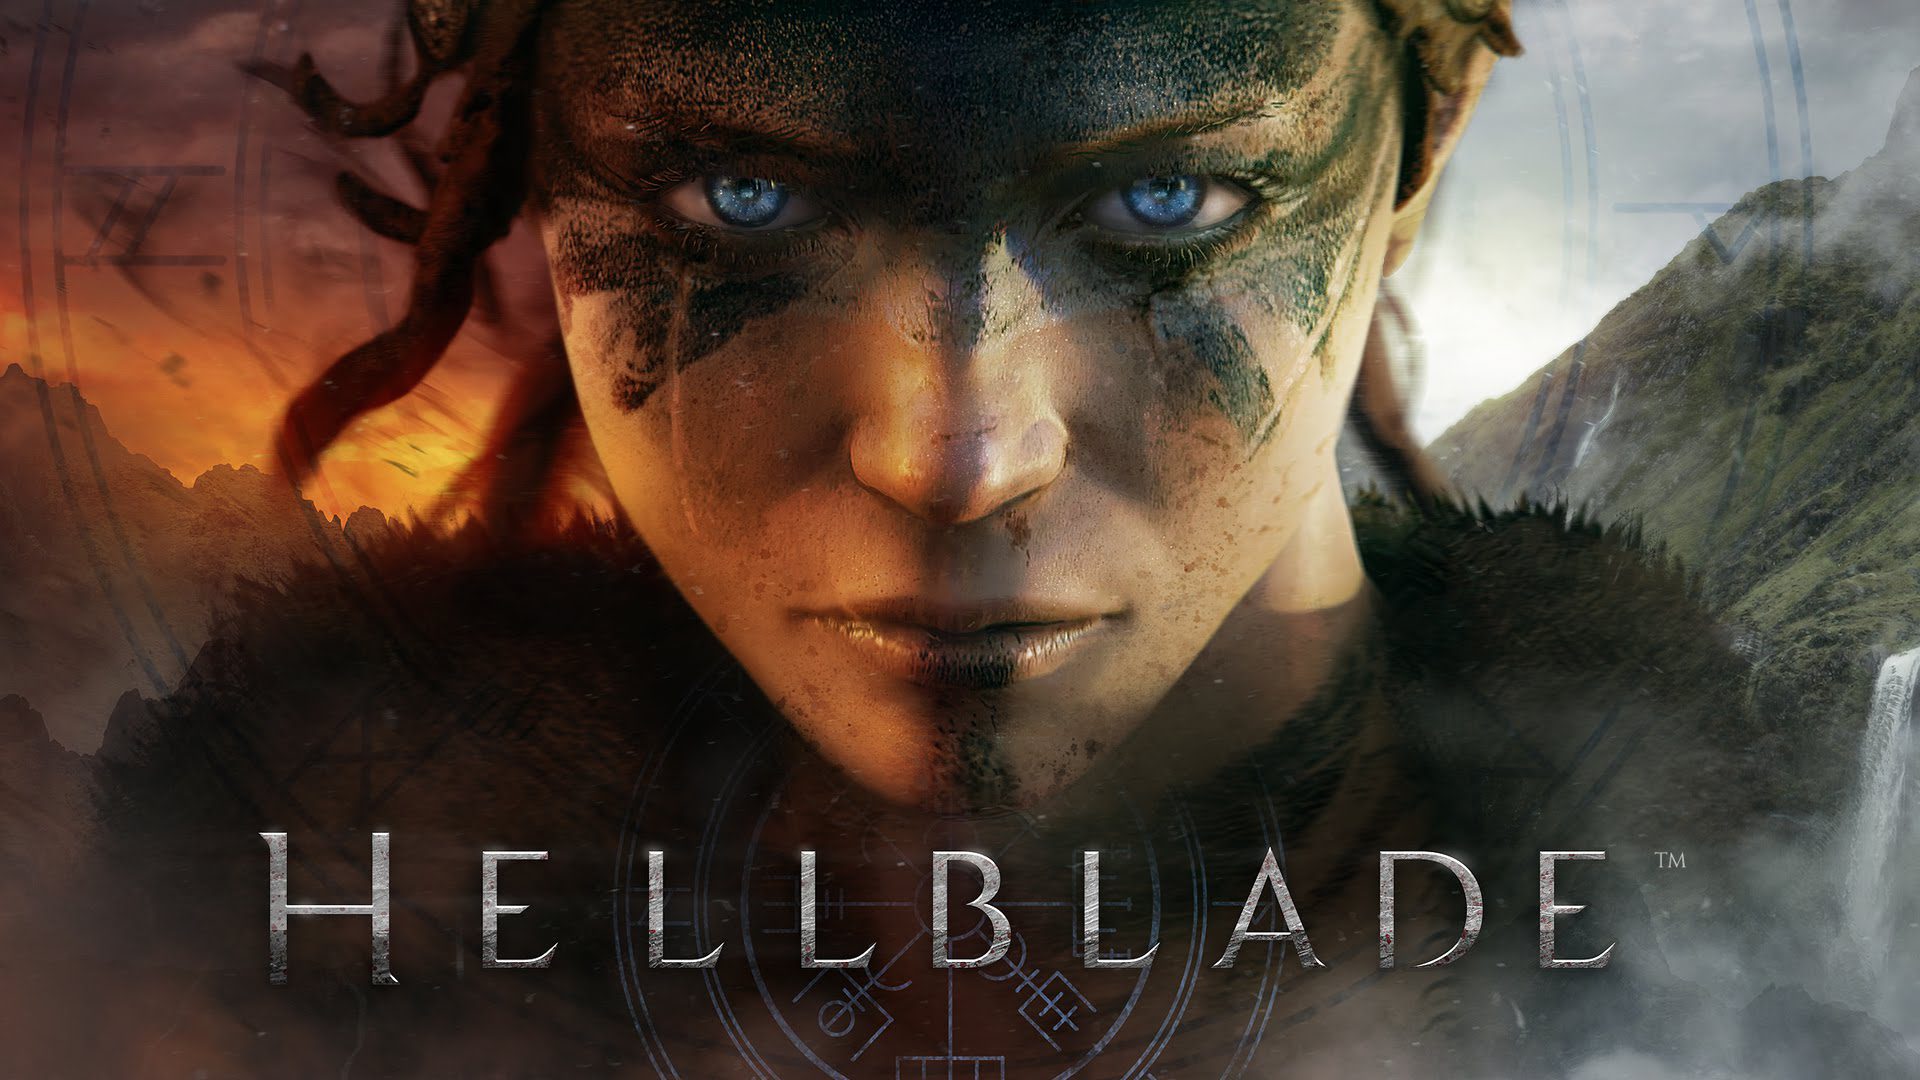 A Photo Mode is being added for Hellblade: Senua’s Sacrifice